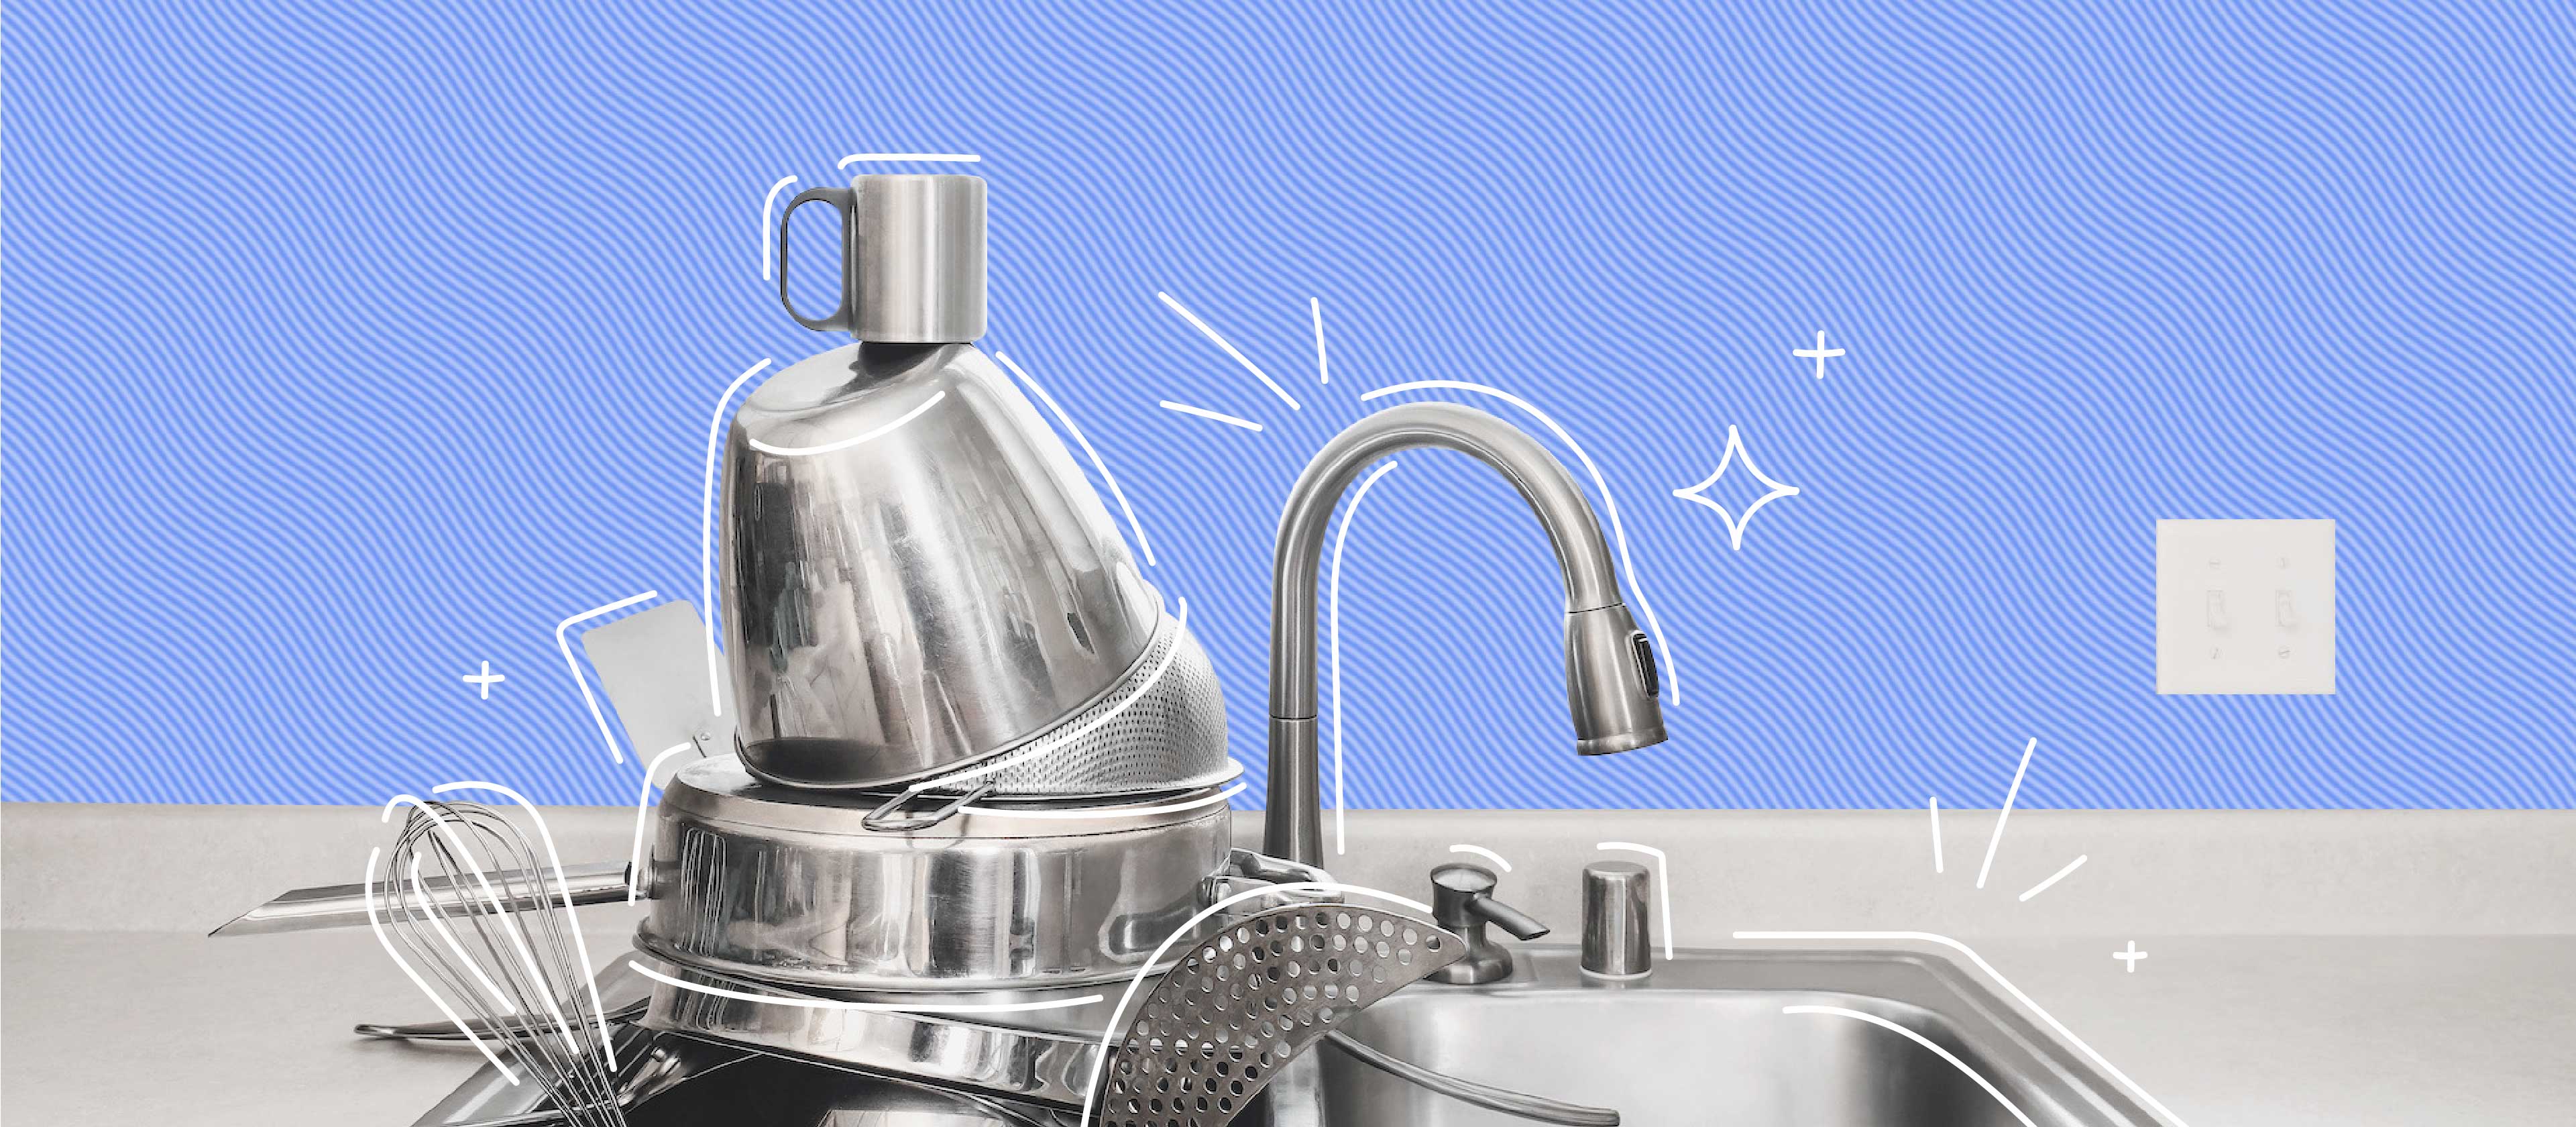 How to Clean Stainless Steel Without Chemicals